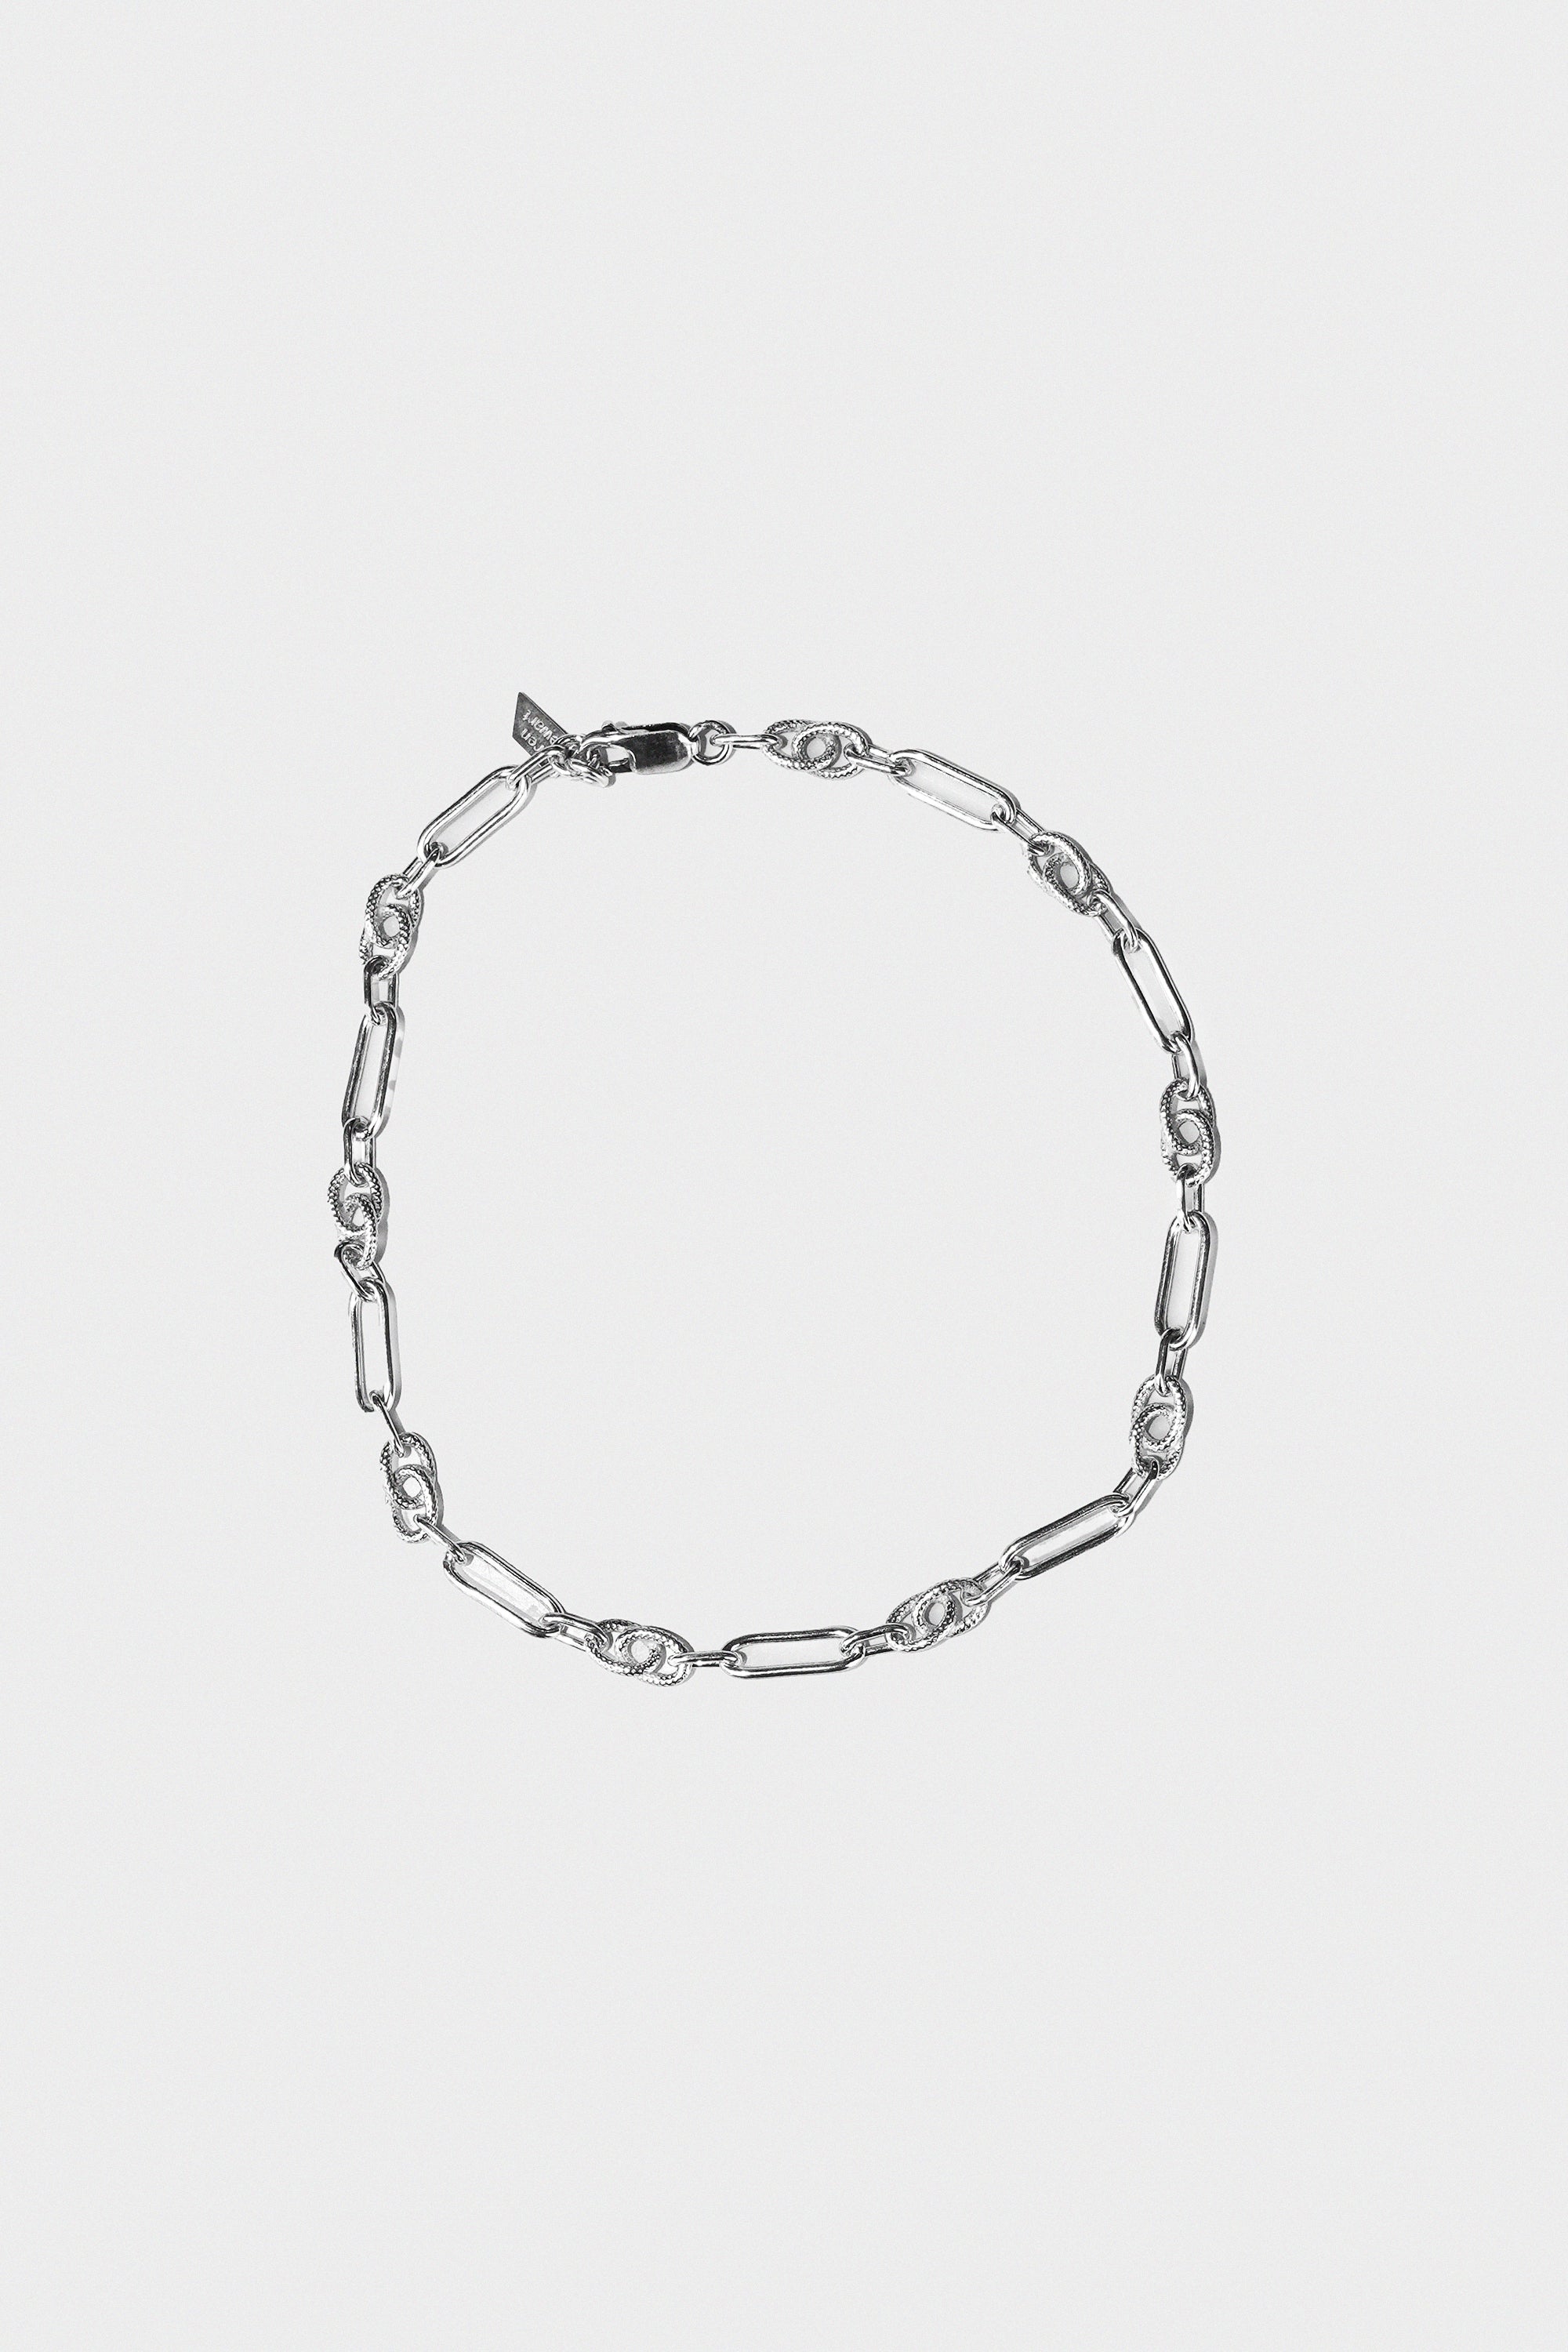 Motley Chain Anklet in Sterling Silver